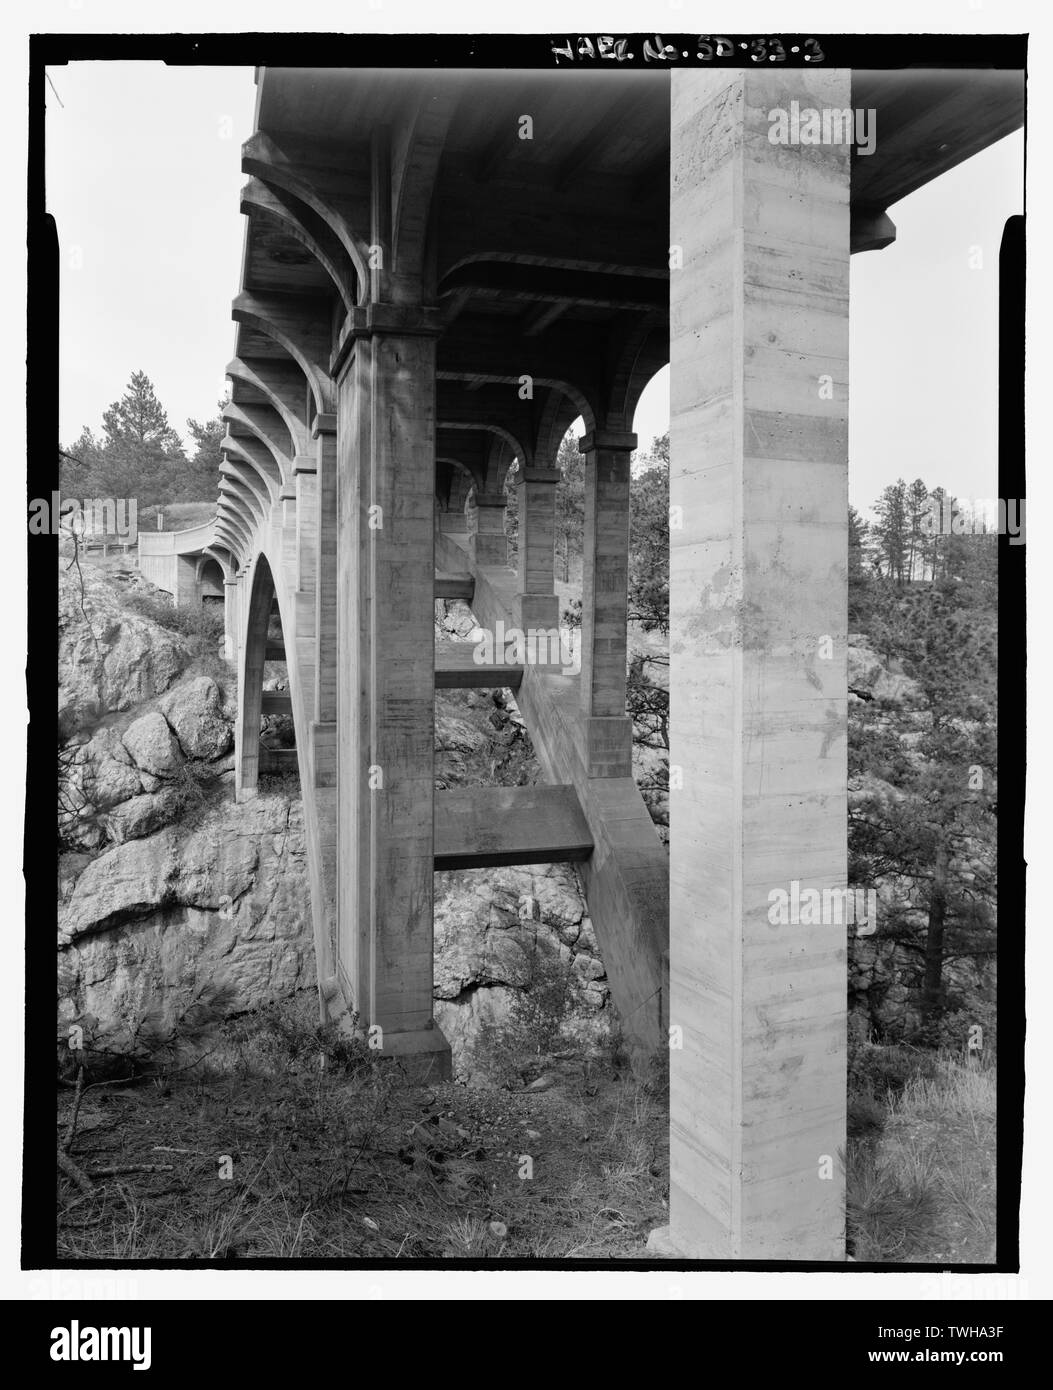 Route 87, Beaver Creek Bridge, underside view. View NE. - Beaver Creek Bridge, Hot Springs, Fall River County, SD; Hamilton, J Harper; Northwestern Engineering Company; Adelstein, Morris E; Linder, Jack A; Gray, Chris, field team project manager; Magdalenos, Christine, landscape architect; Marston, Christopher, project manager; Christianson, Justine, transmitter; Davis, Tim, historian; Delyea, Todd, delineator; Grinstead, Tim, delineator; Heckaman, Stacey, delineator; Michel, Roger, delineator; Tichi, Claire, historian; Haas, David, photographer Stock Photo